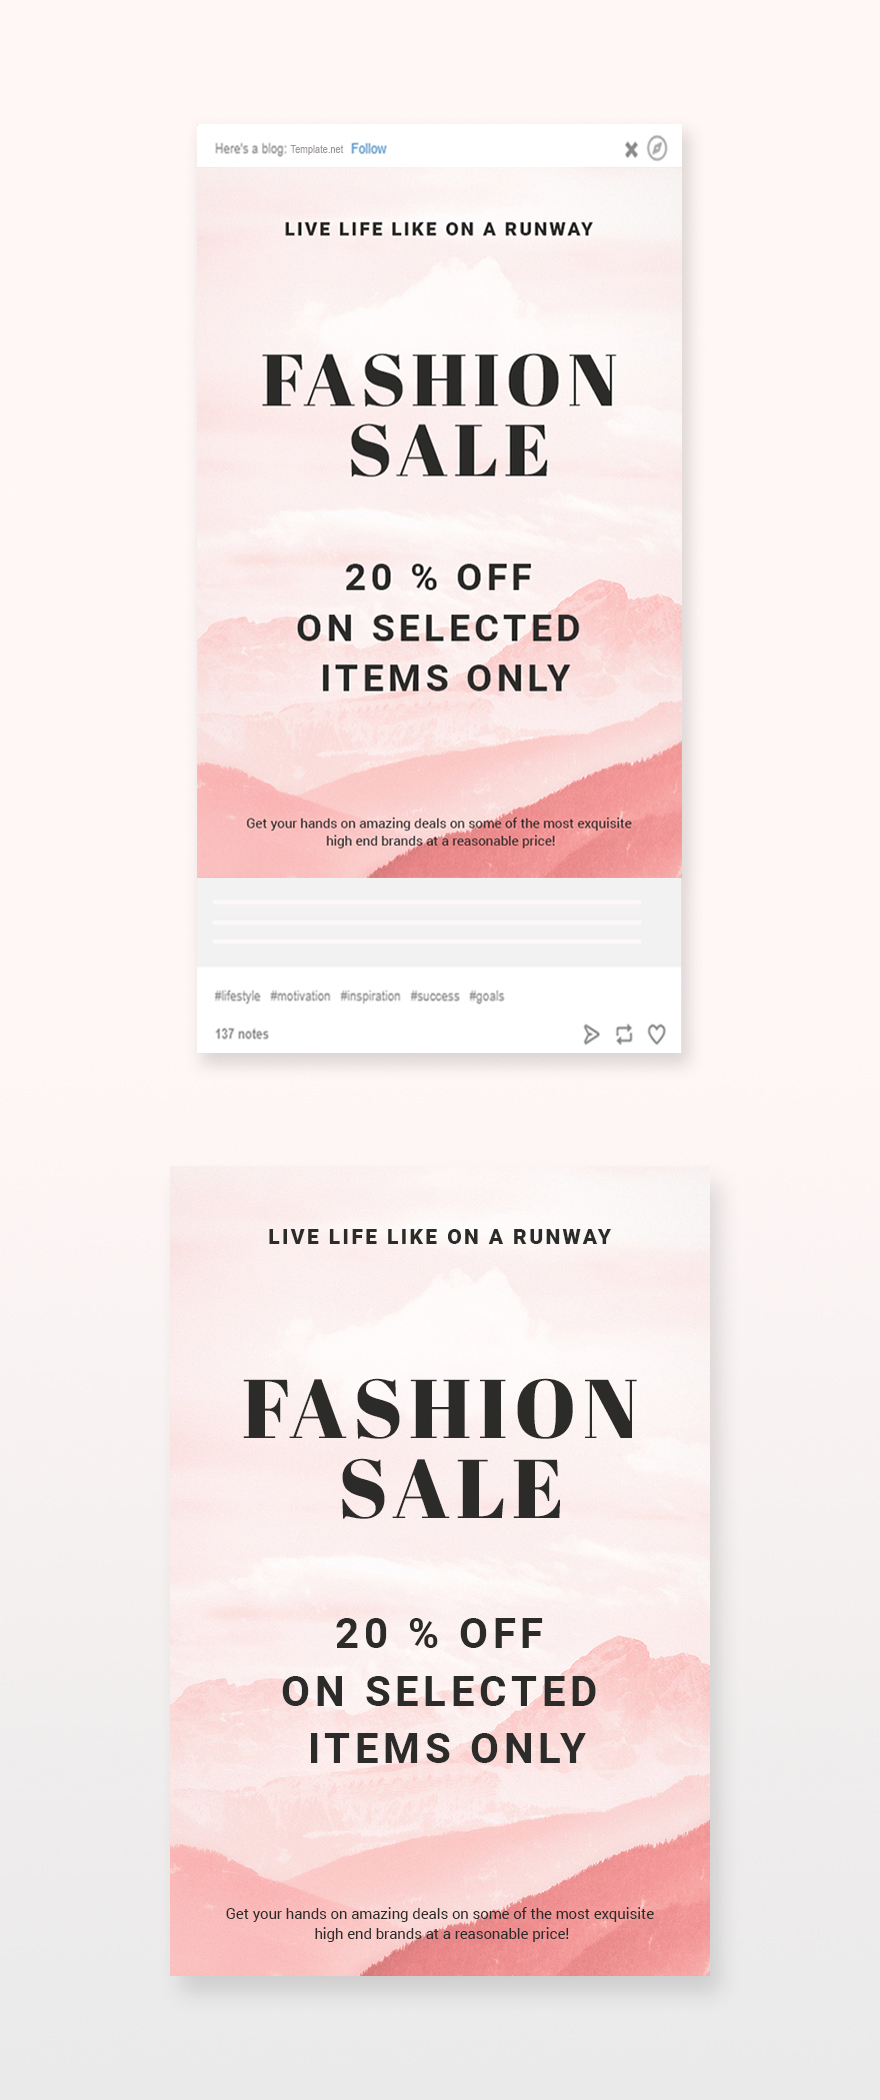 Boutique Tumblr Post Template PSD Template net